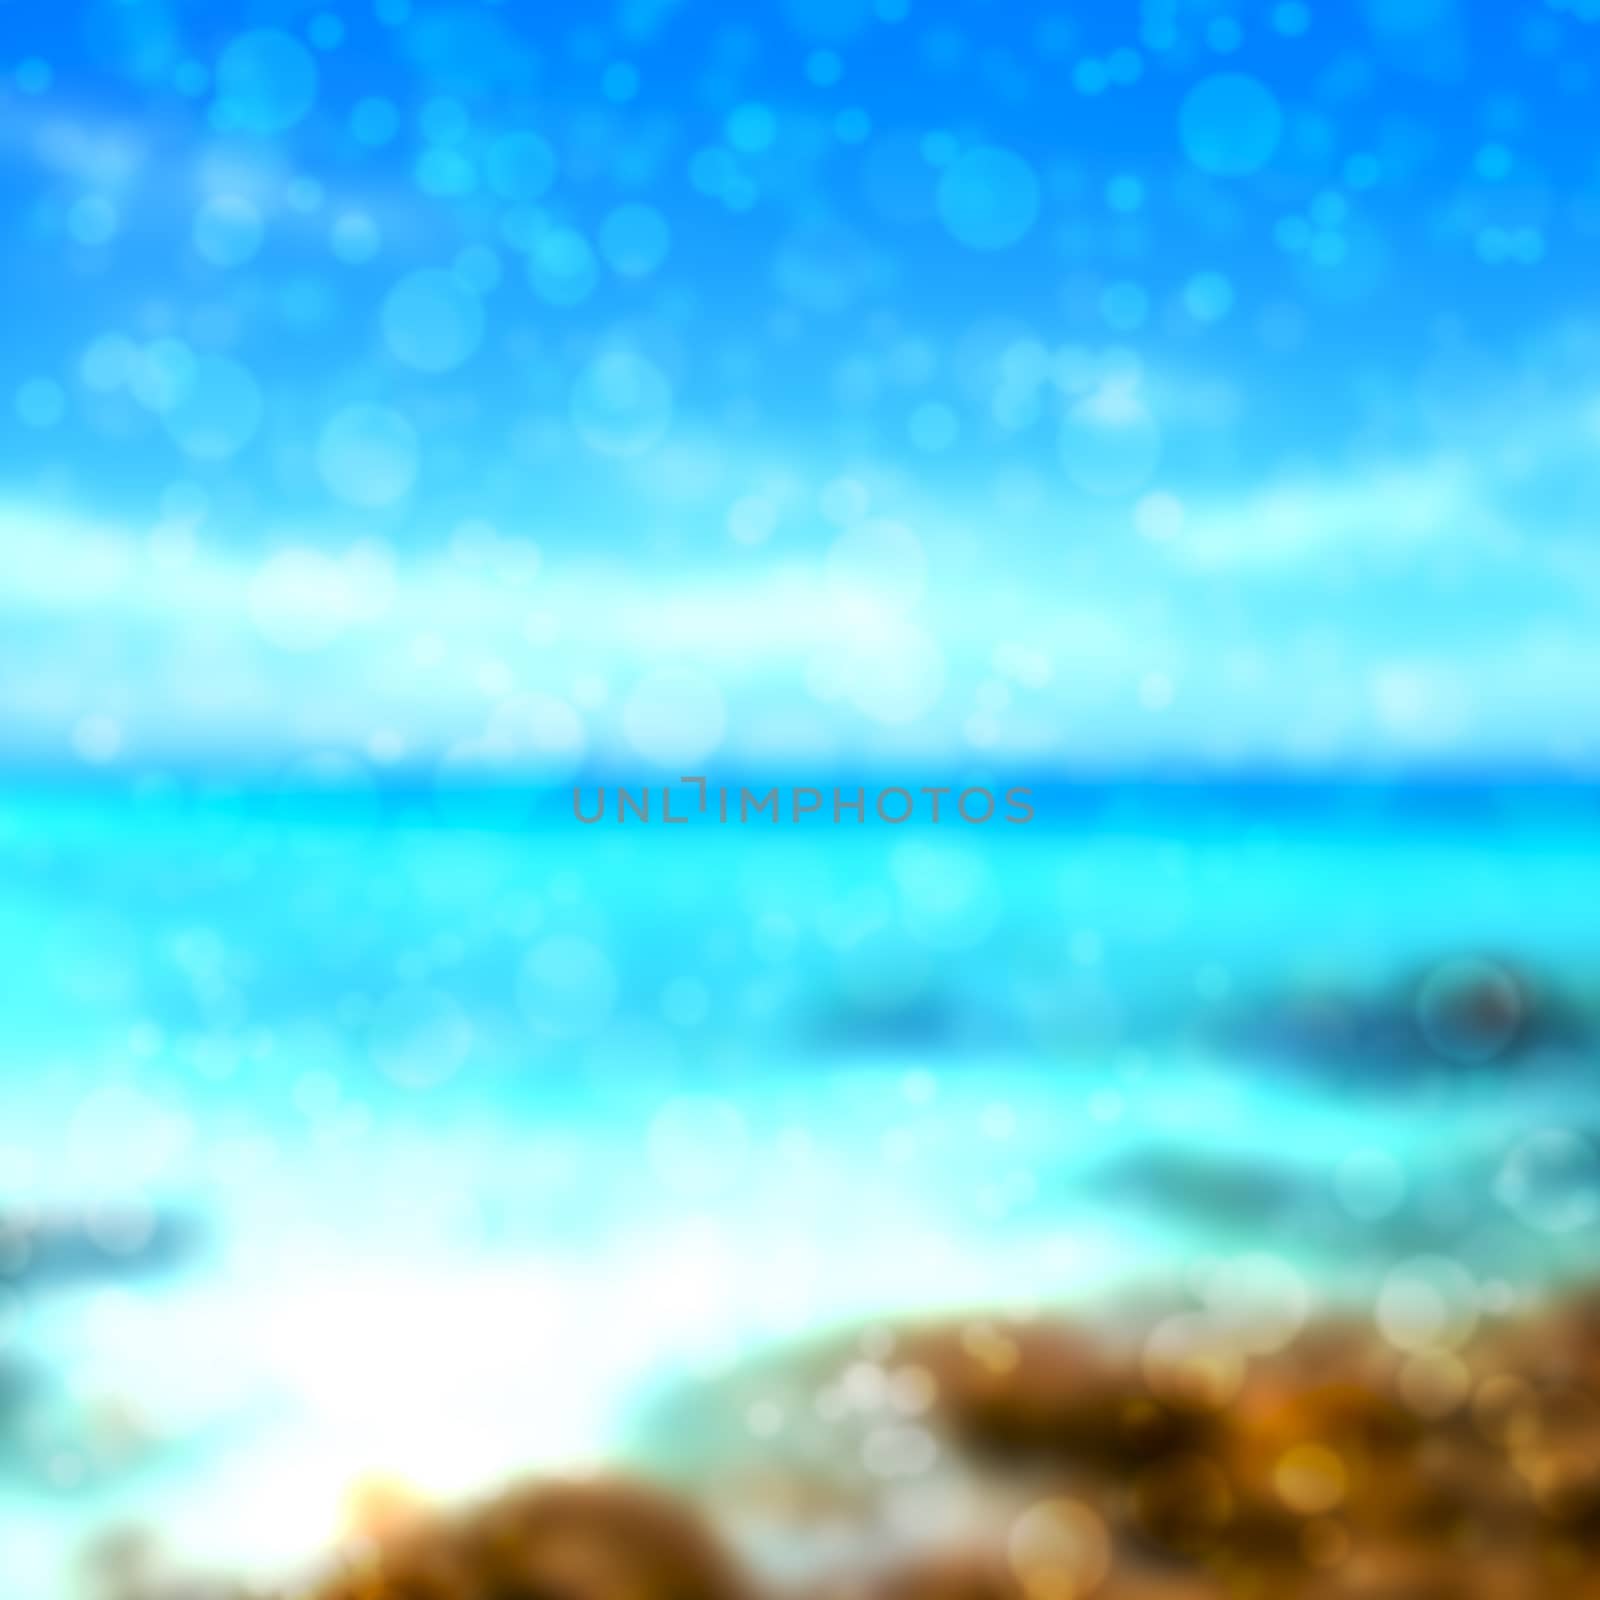 Soft and blurred bokeh background by kitty45